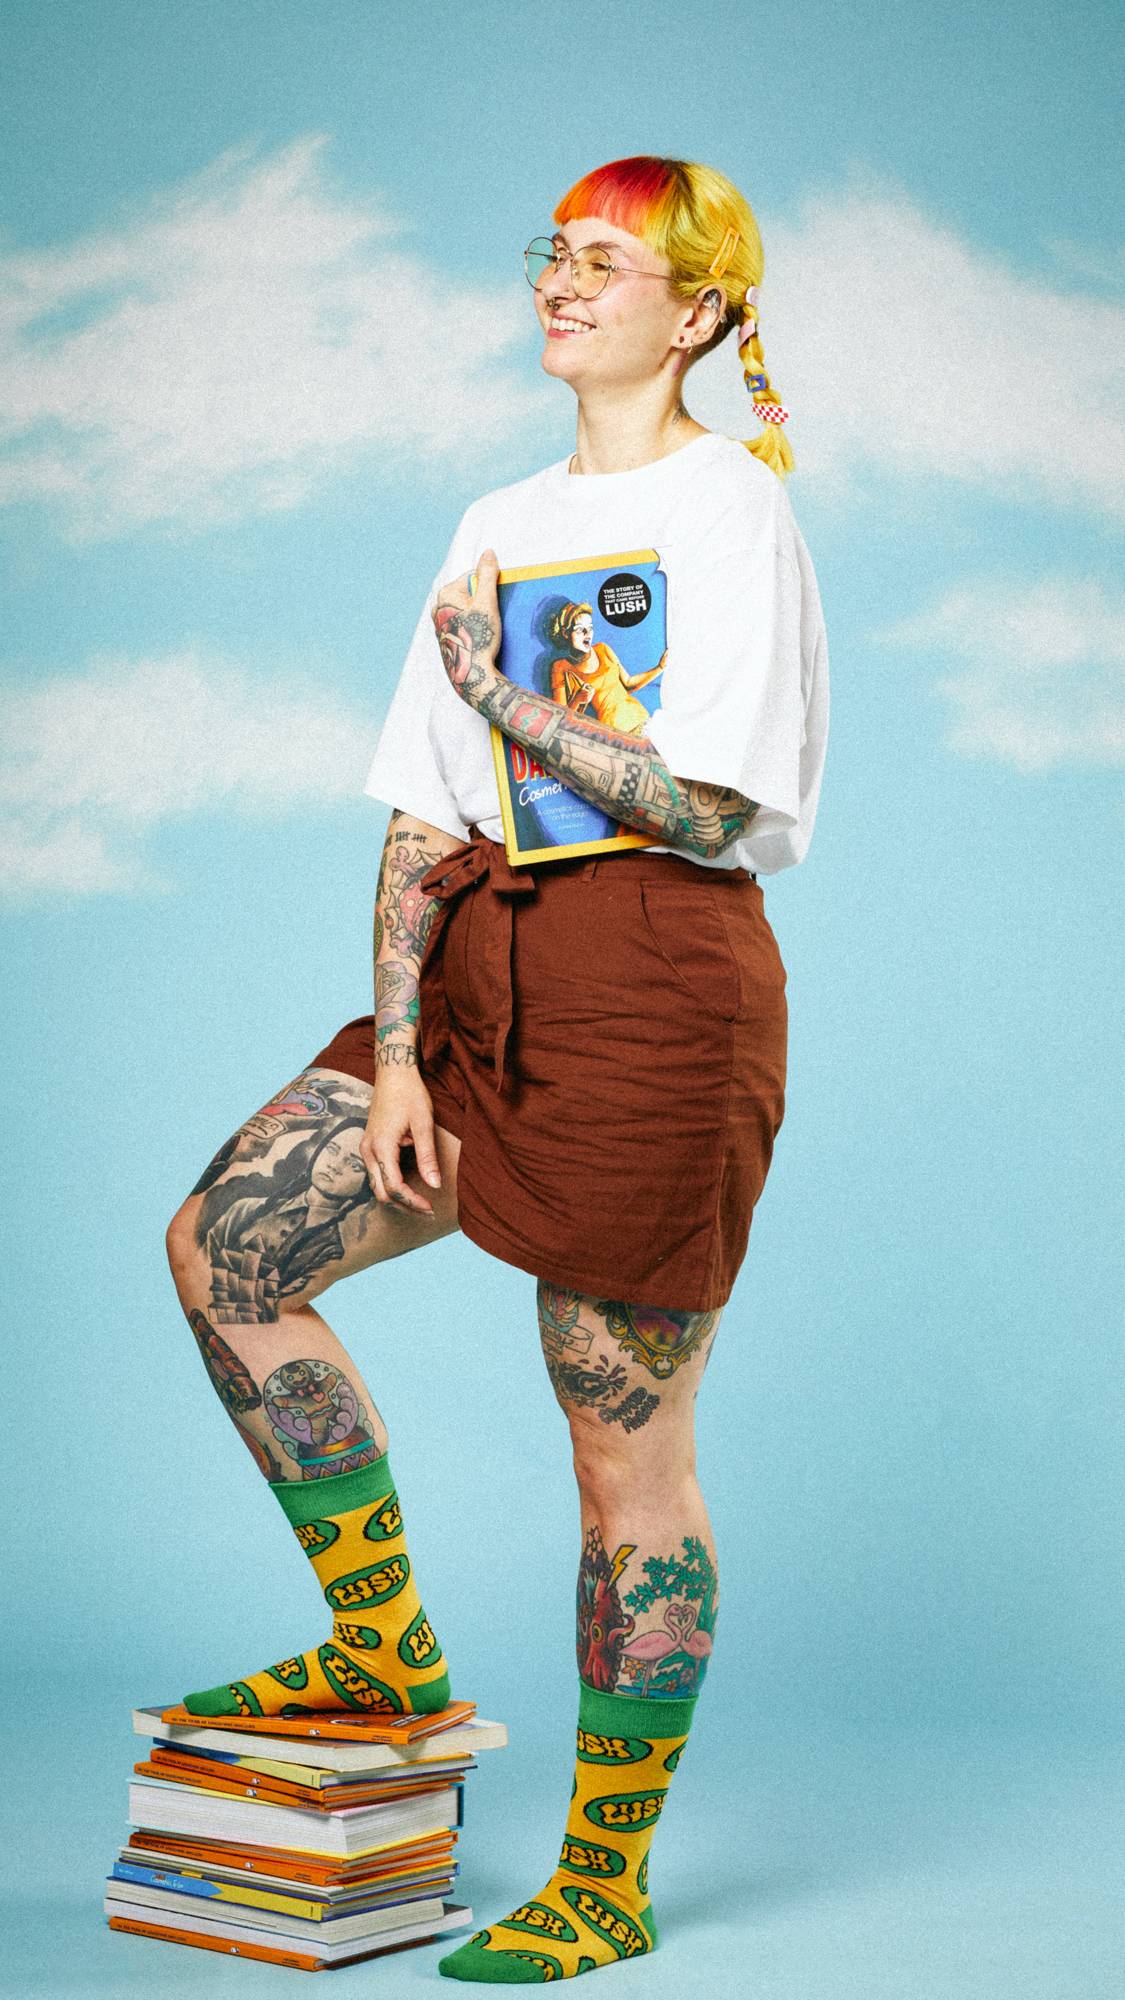 Model is on a sky-style backing in a simple outfit wearing the Retro Bubble Lush socks with one foot on a stack of books.